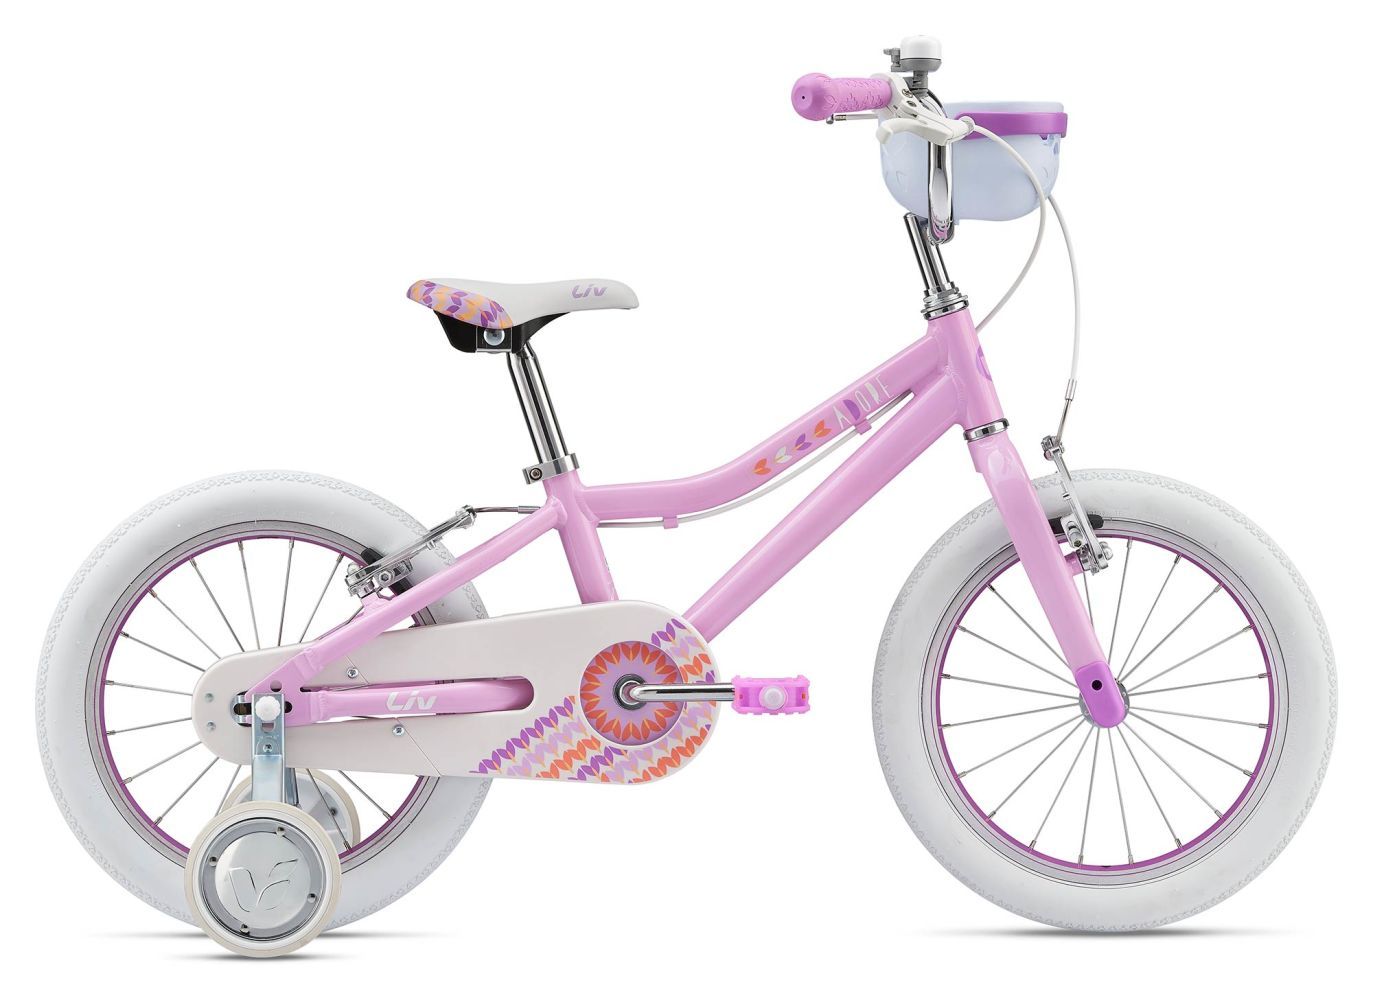 16 inch bike without training wheels